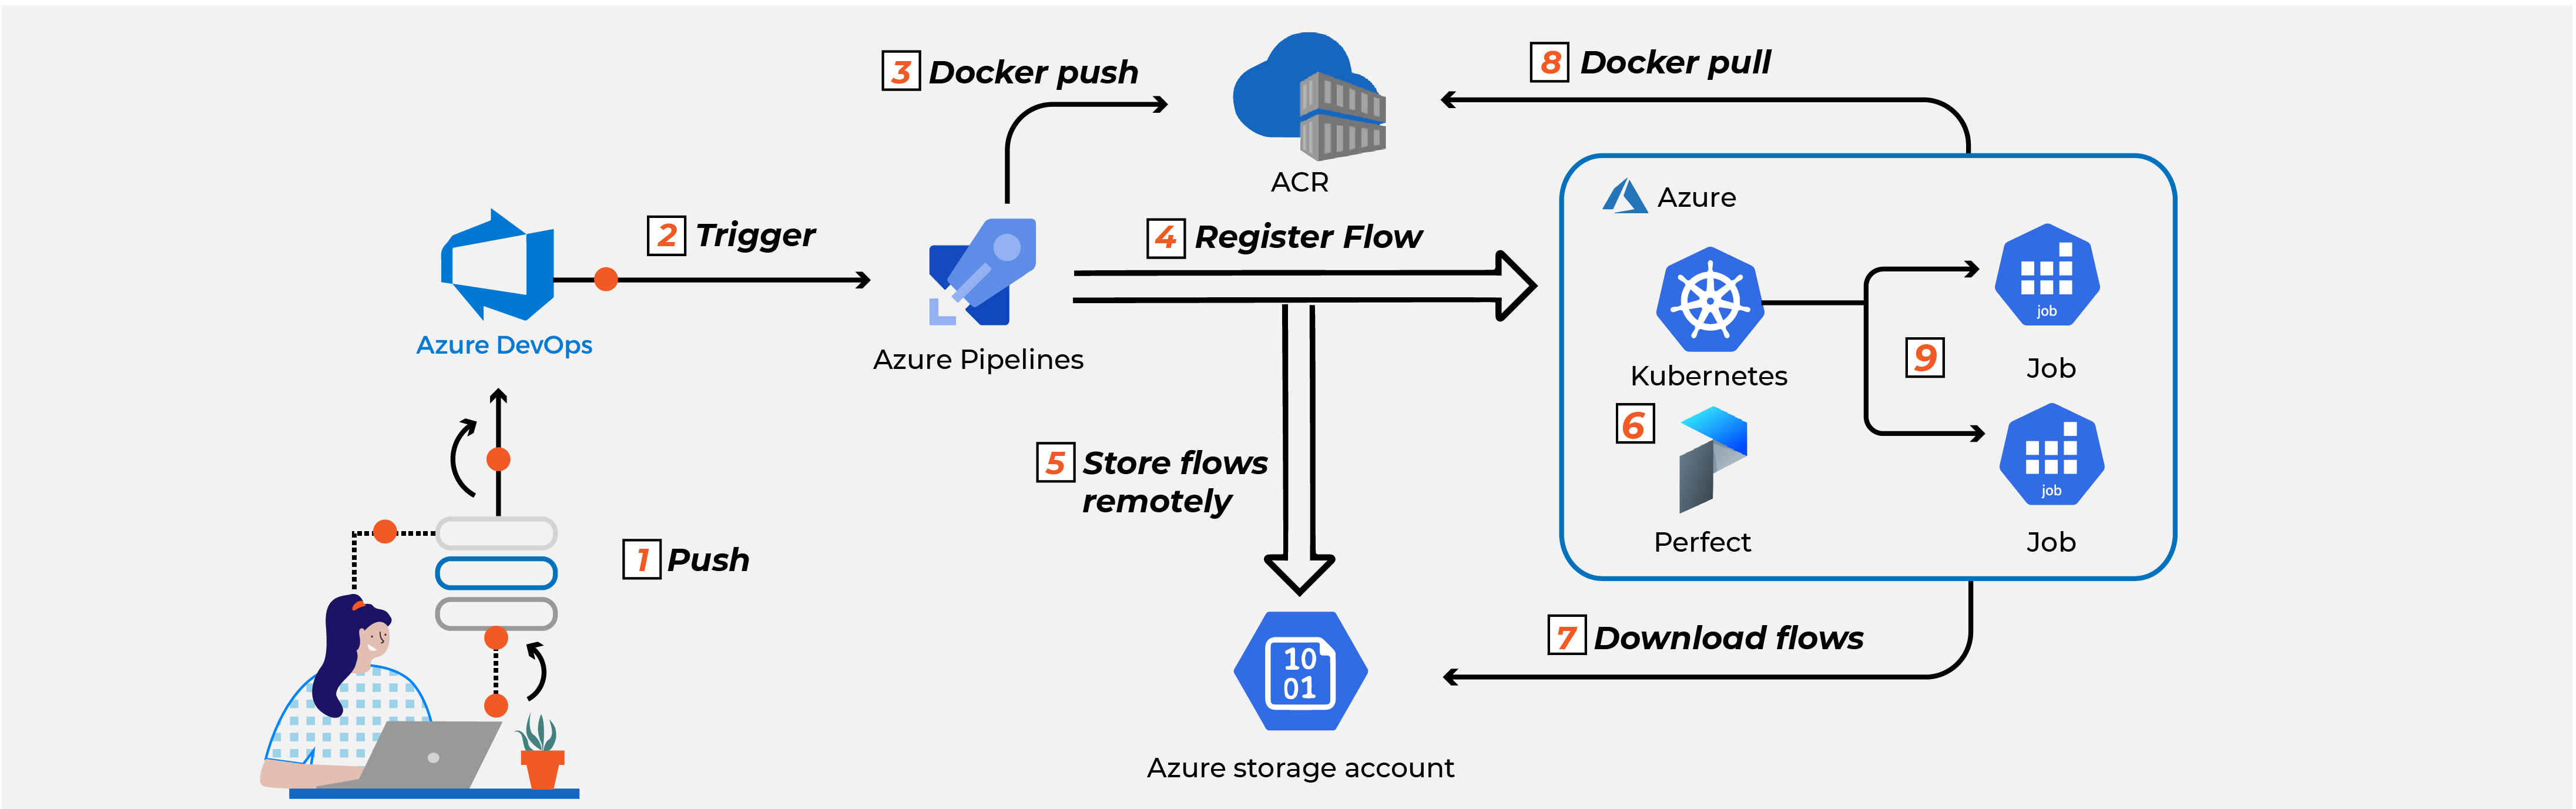 Prefect Workflow Automation with Azure DevOps and AKS